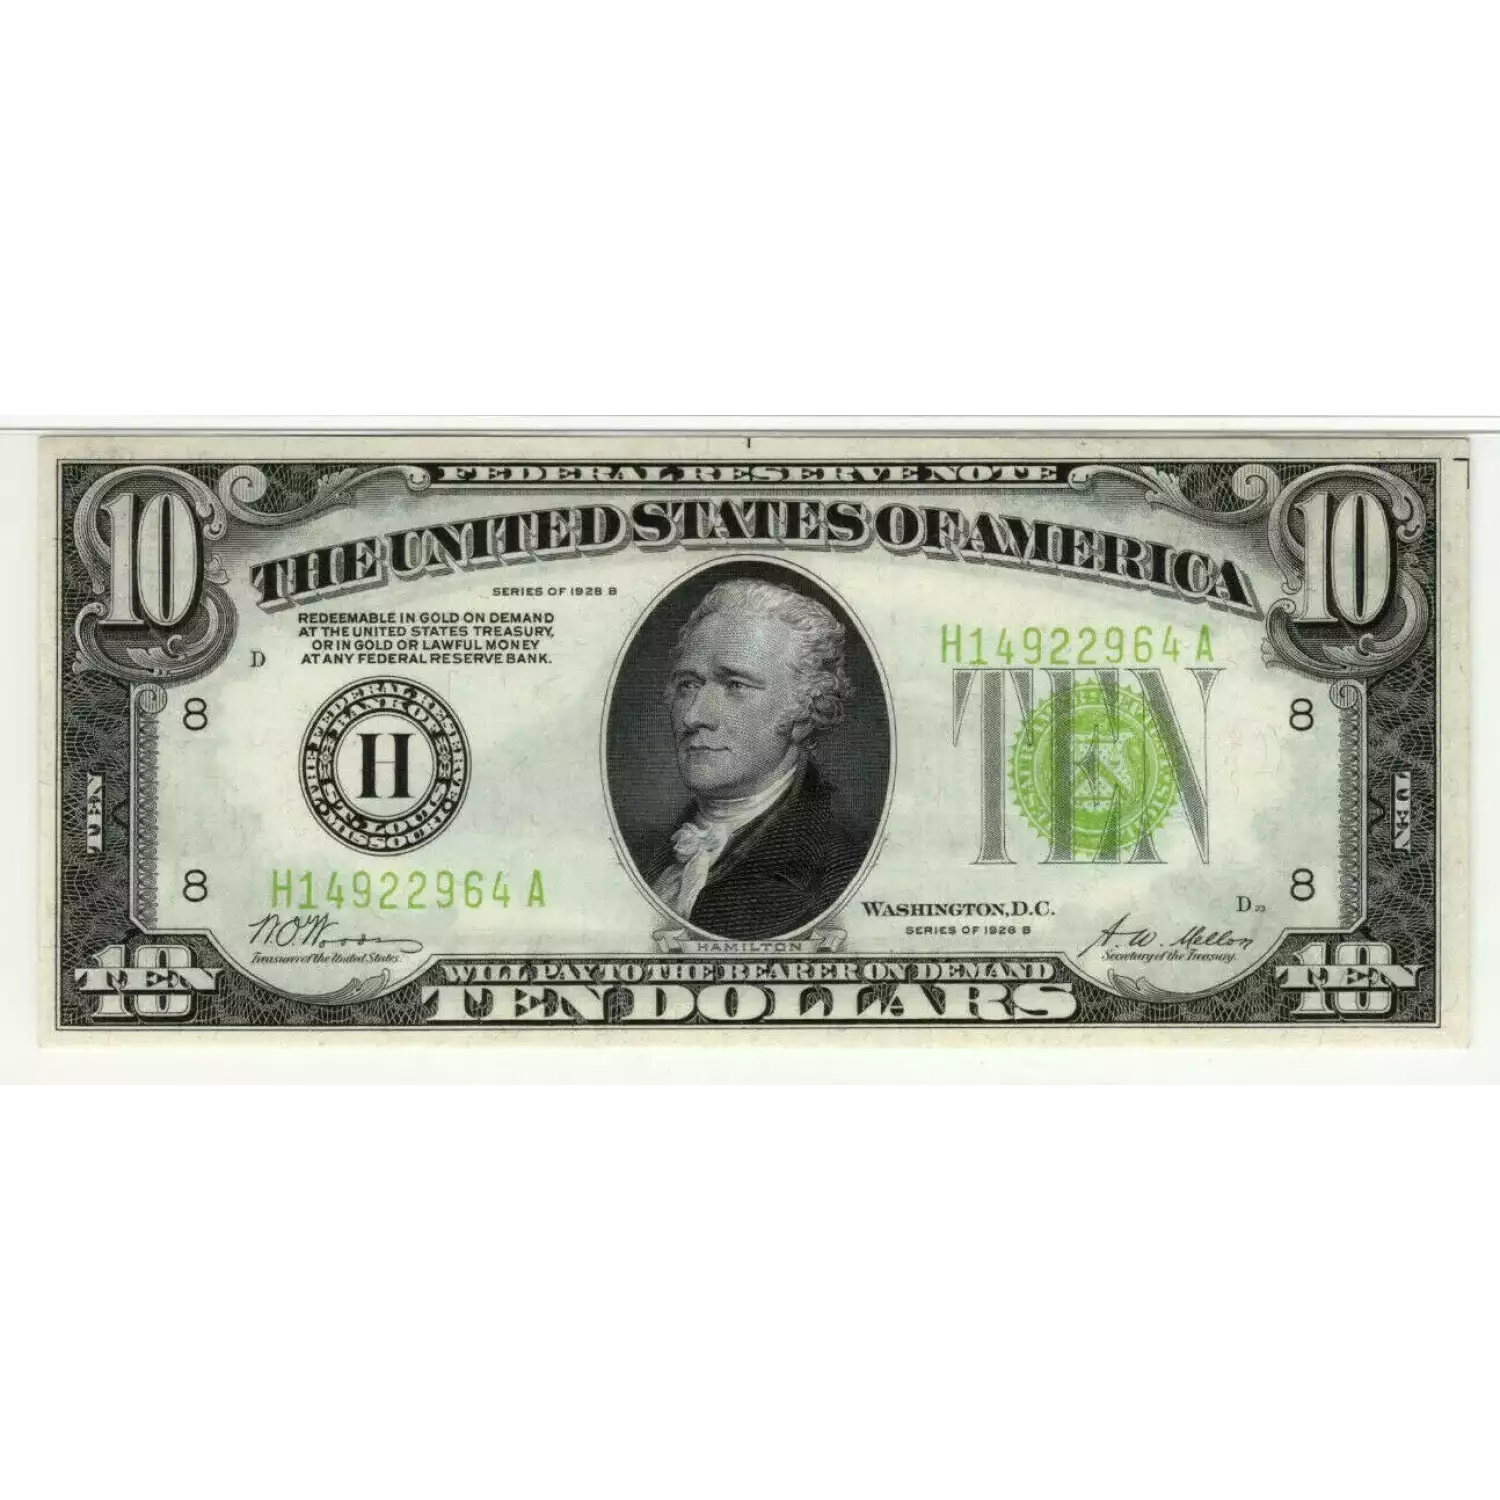 Federal Reserve Note St. Louis